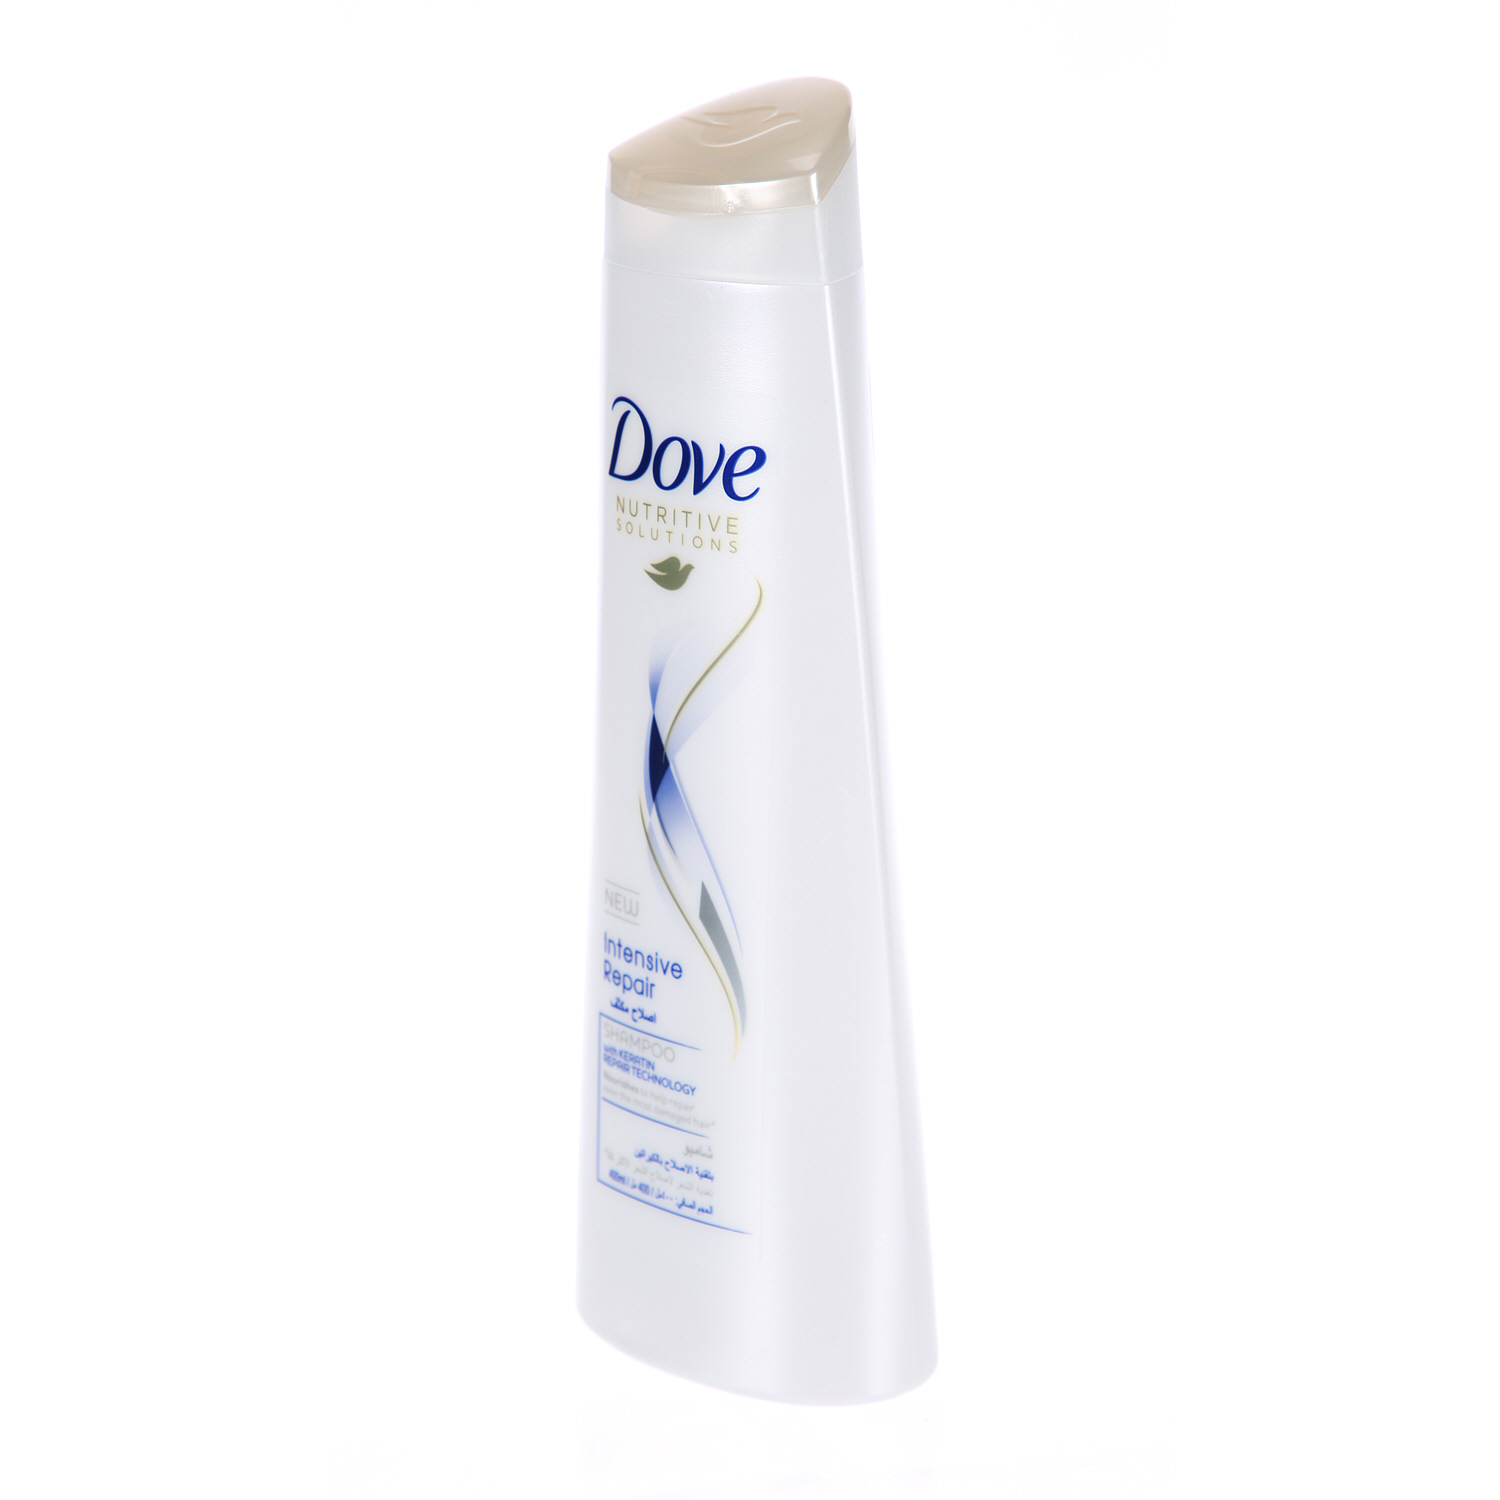 Dove Shampoo for Damaged Hair Intensive Repair Nourishing Care for up to 100% Healthy Looking Hair 400 ml